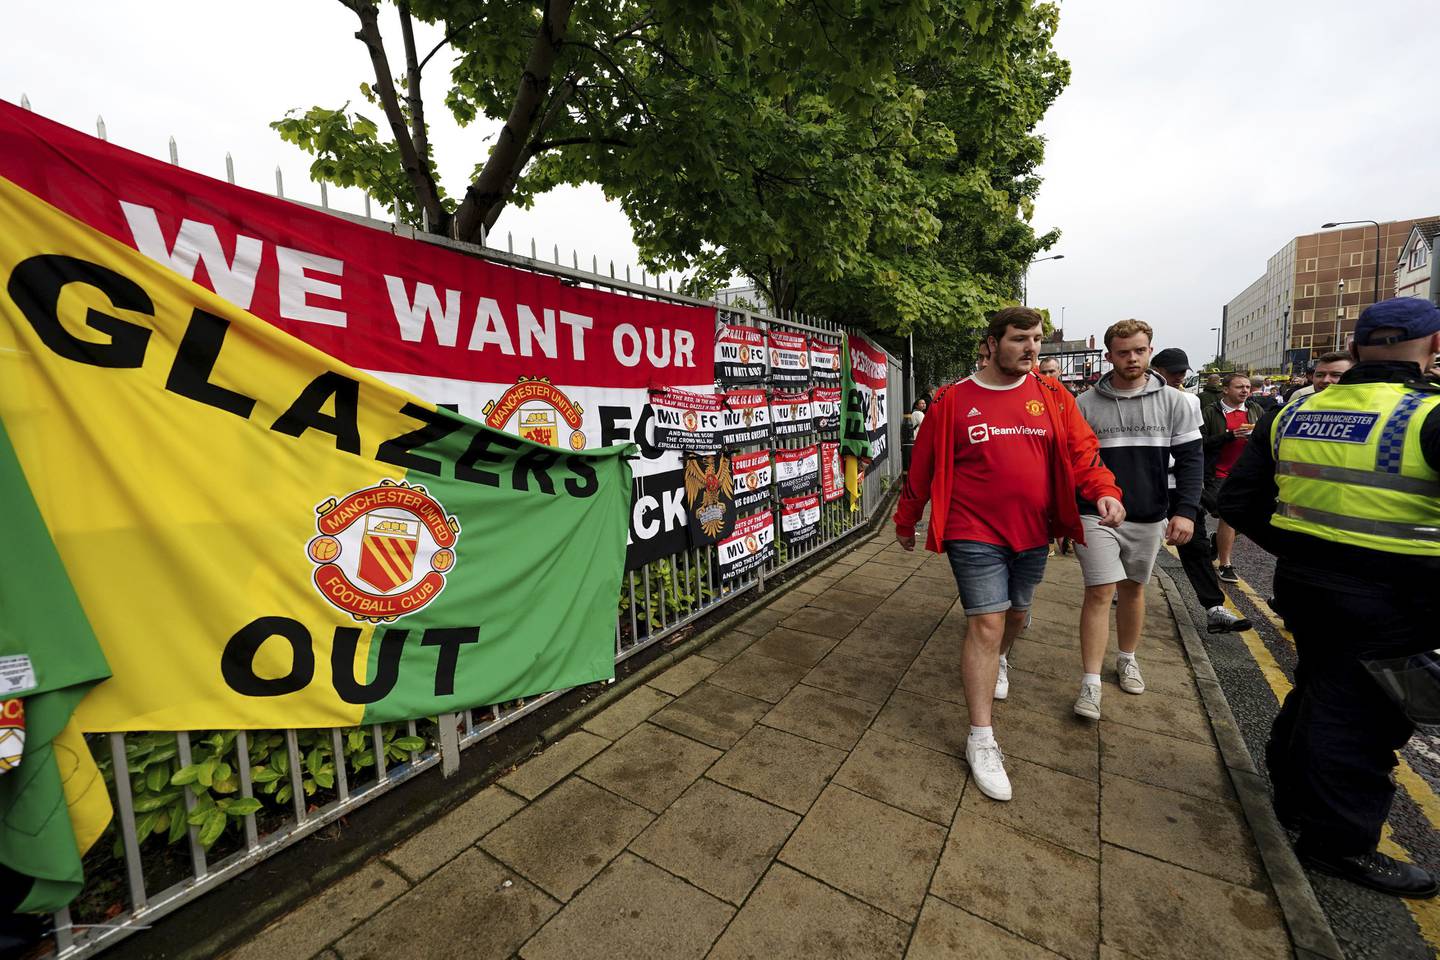 Fans protest against the Manchester United owners in August. PA